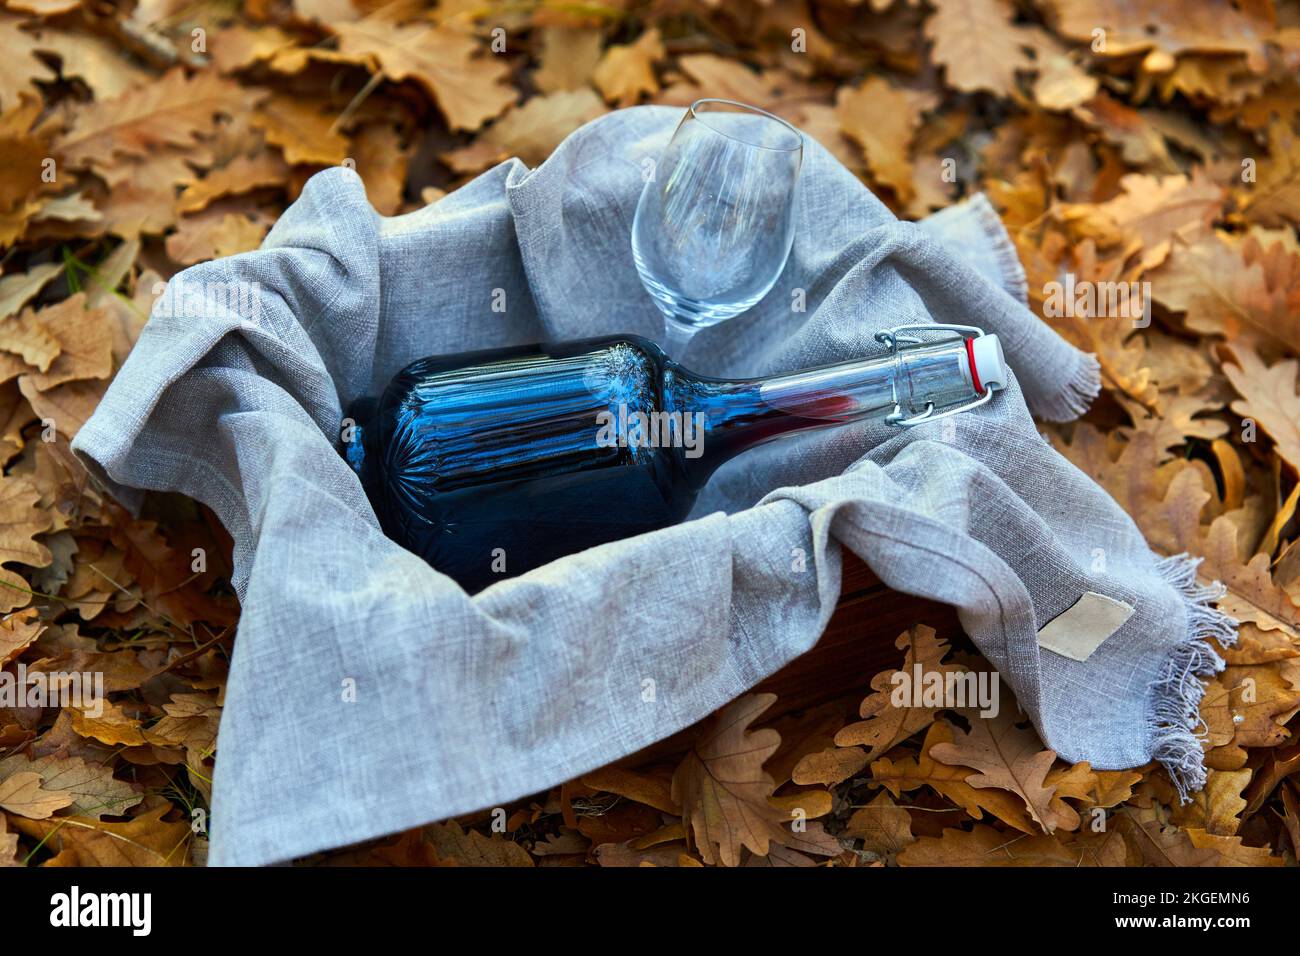 A bottle of red wine in a crate and a towel on the fallen leaves in the forest Stock Photo